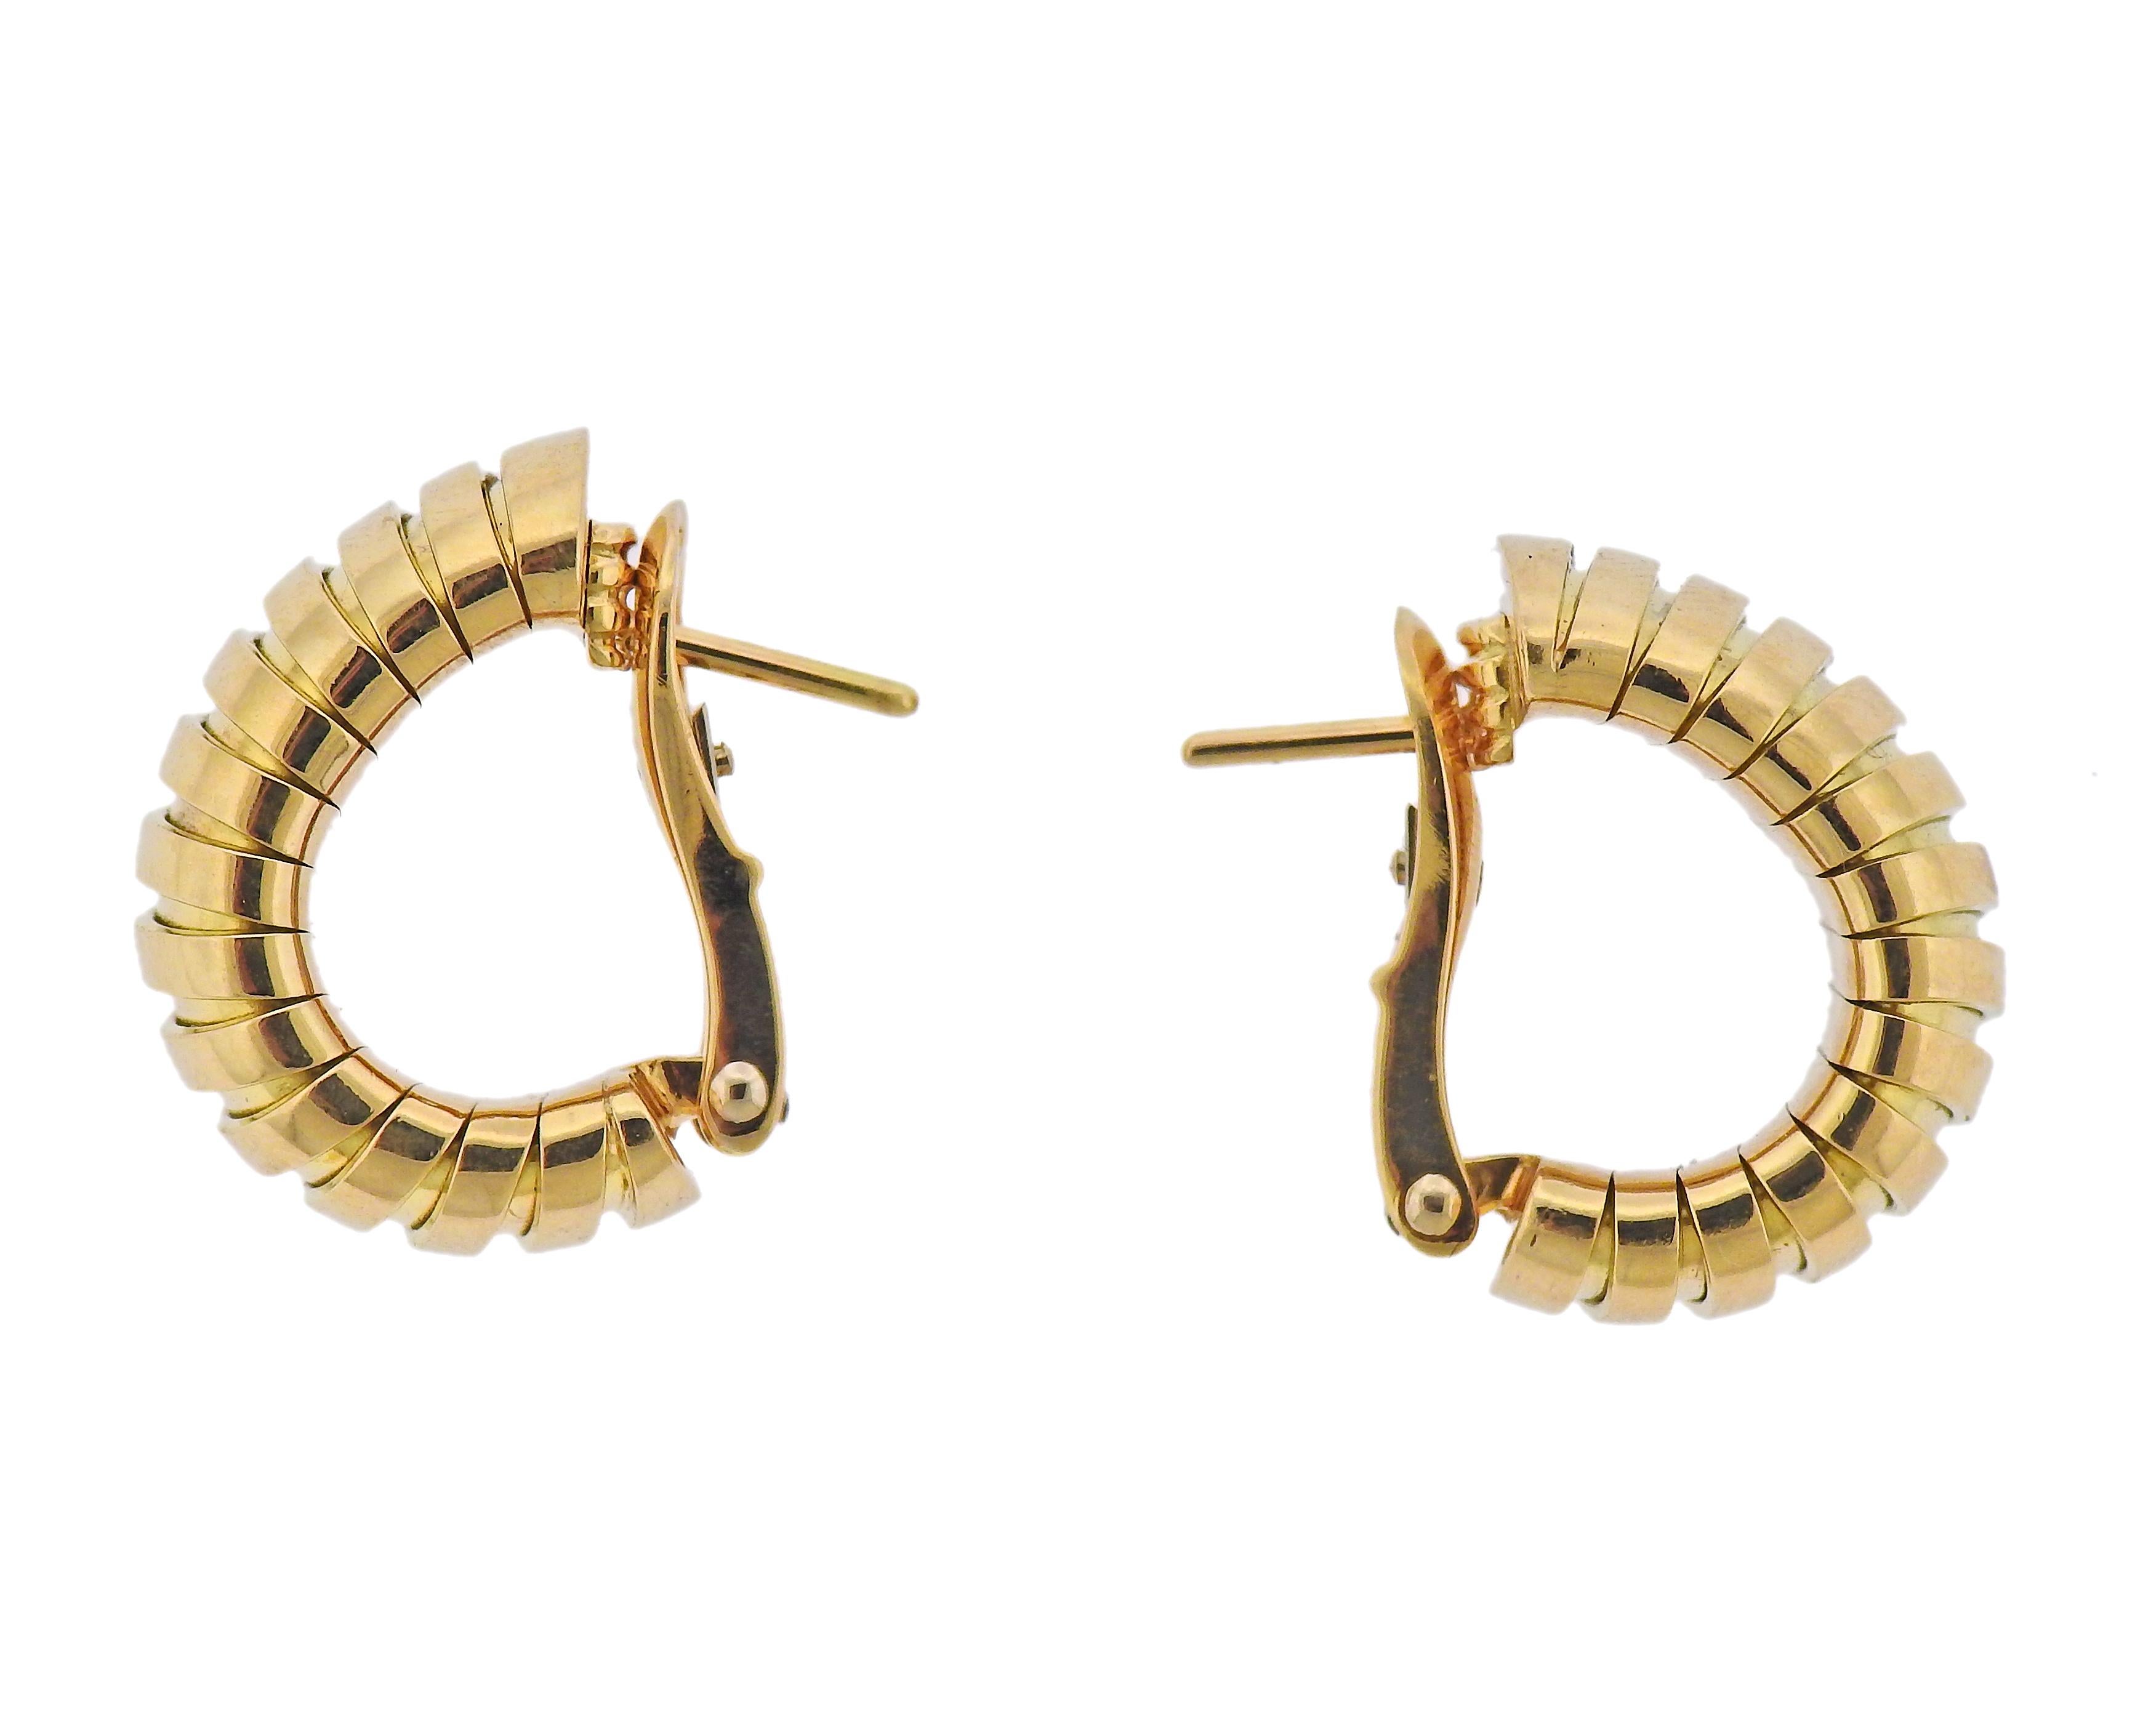 Pair of 18k yellow gold Tubogas half hoop earrings by Bvlgari. Earrings are 22mm x 11mm wide. Marked: Bvlgari, 750, Italian mark. Weight - 28.3 grams. 